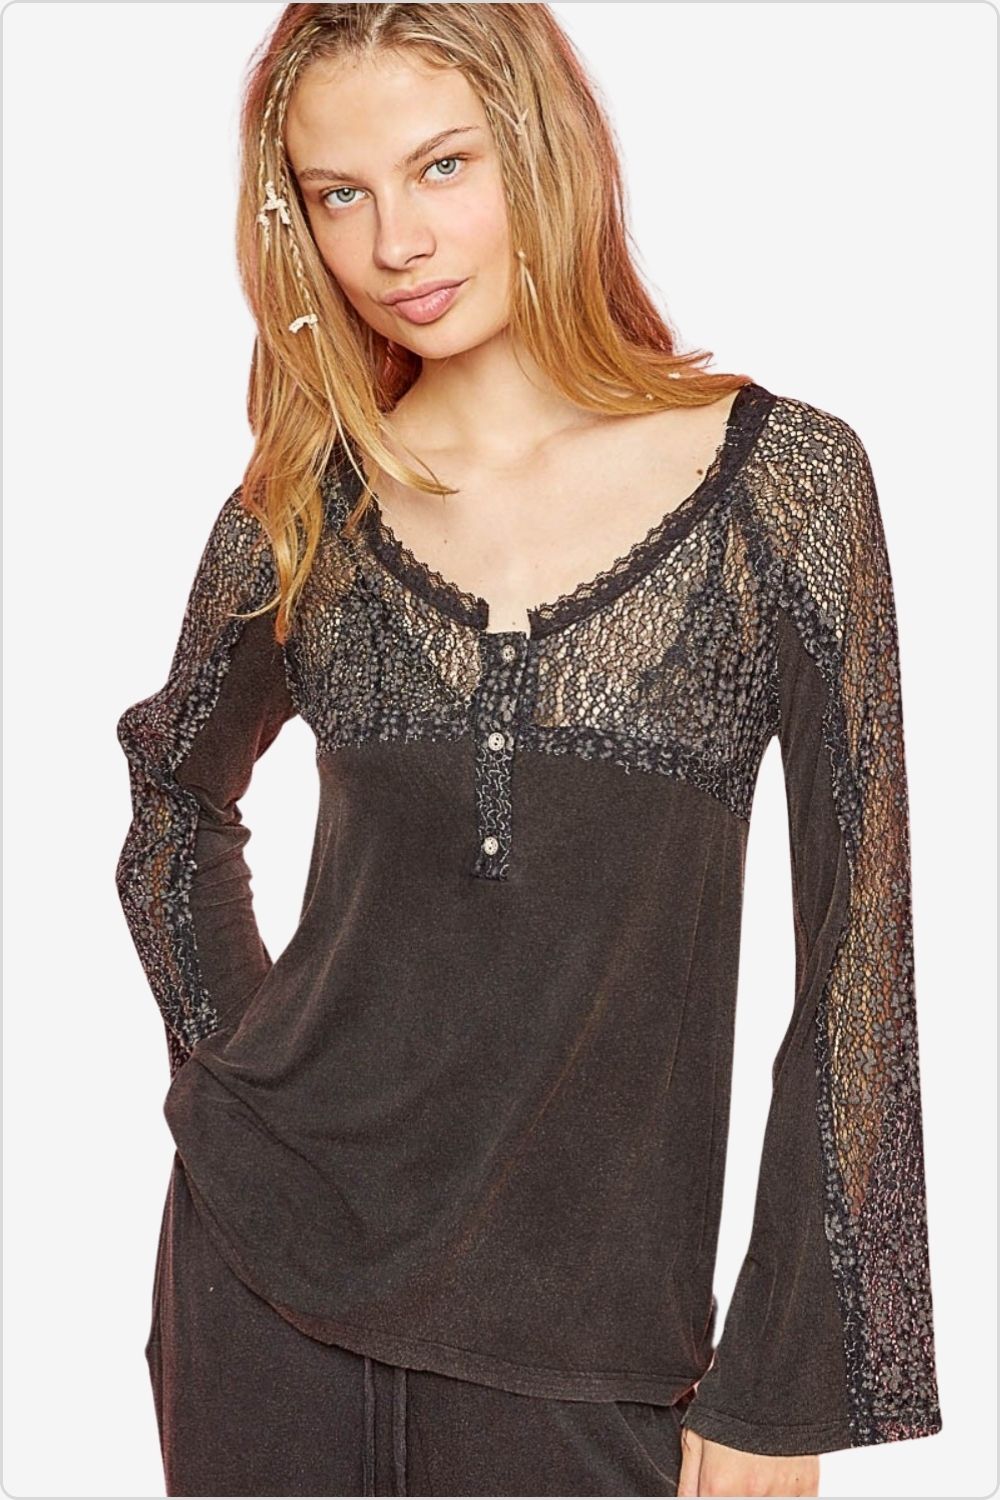 Elegant V-neck lace top in front view, perfect for versatile styling.